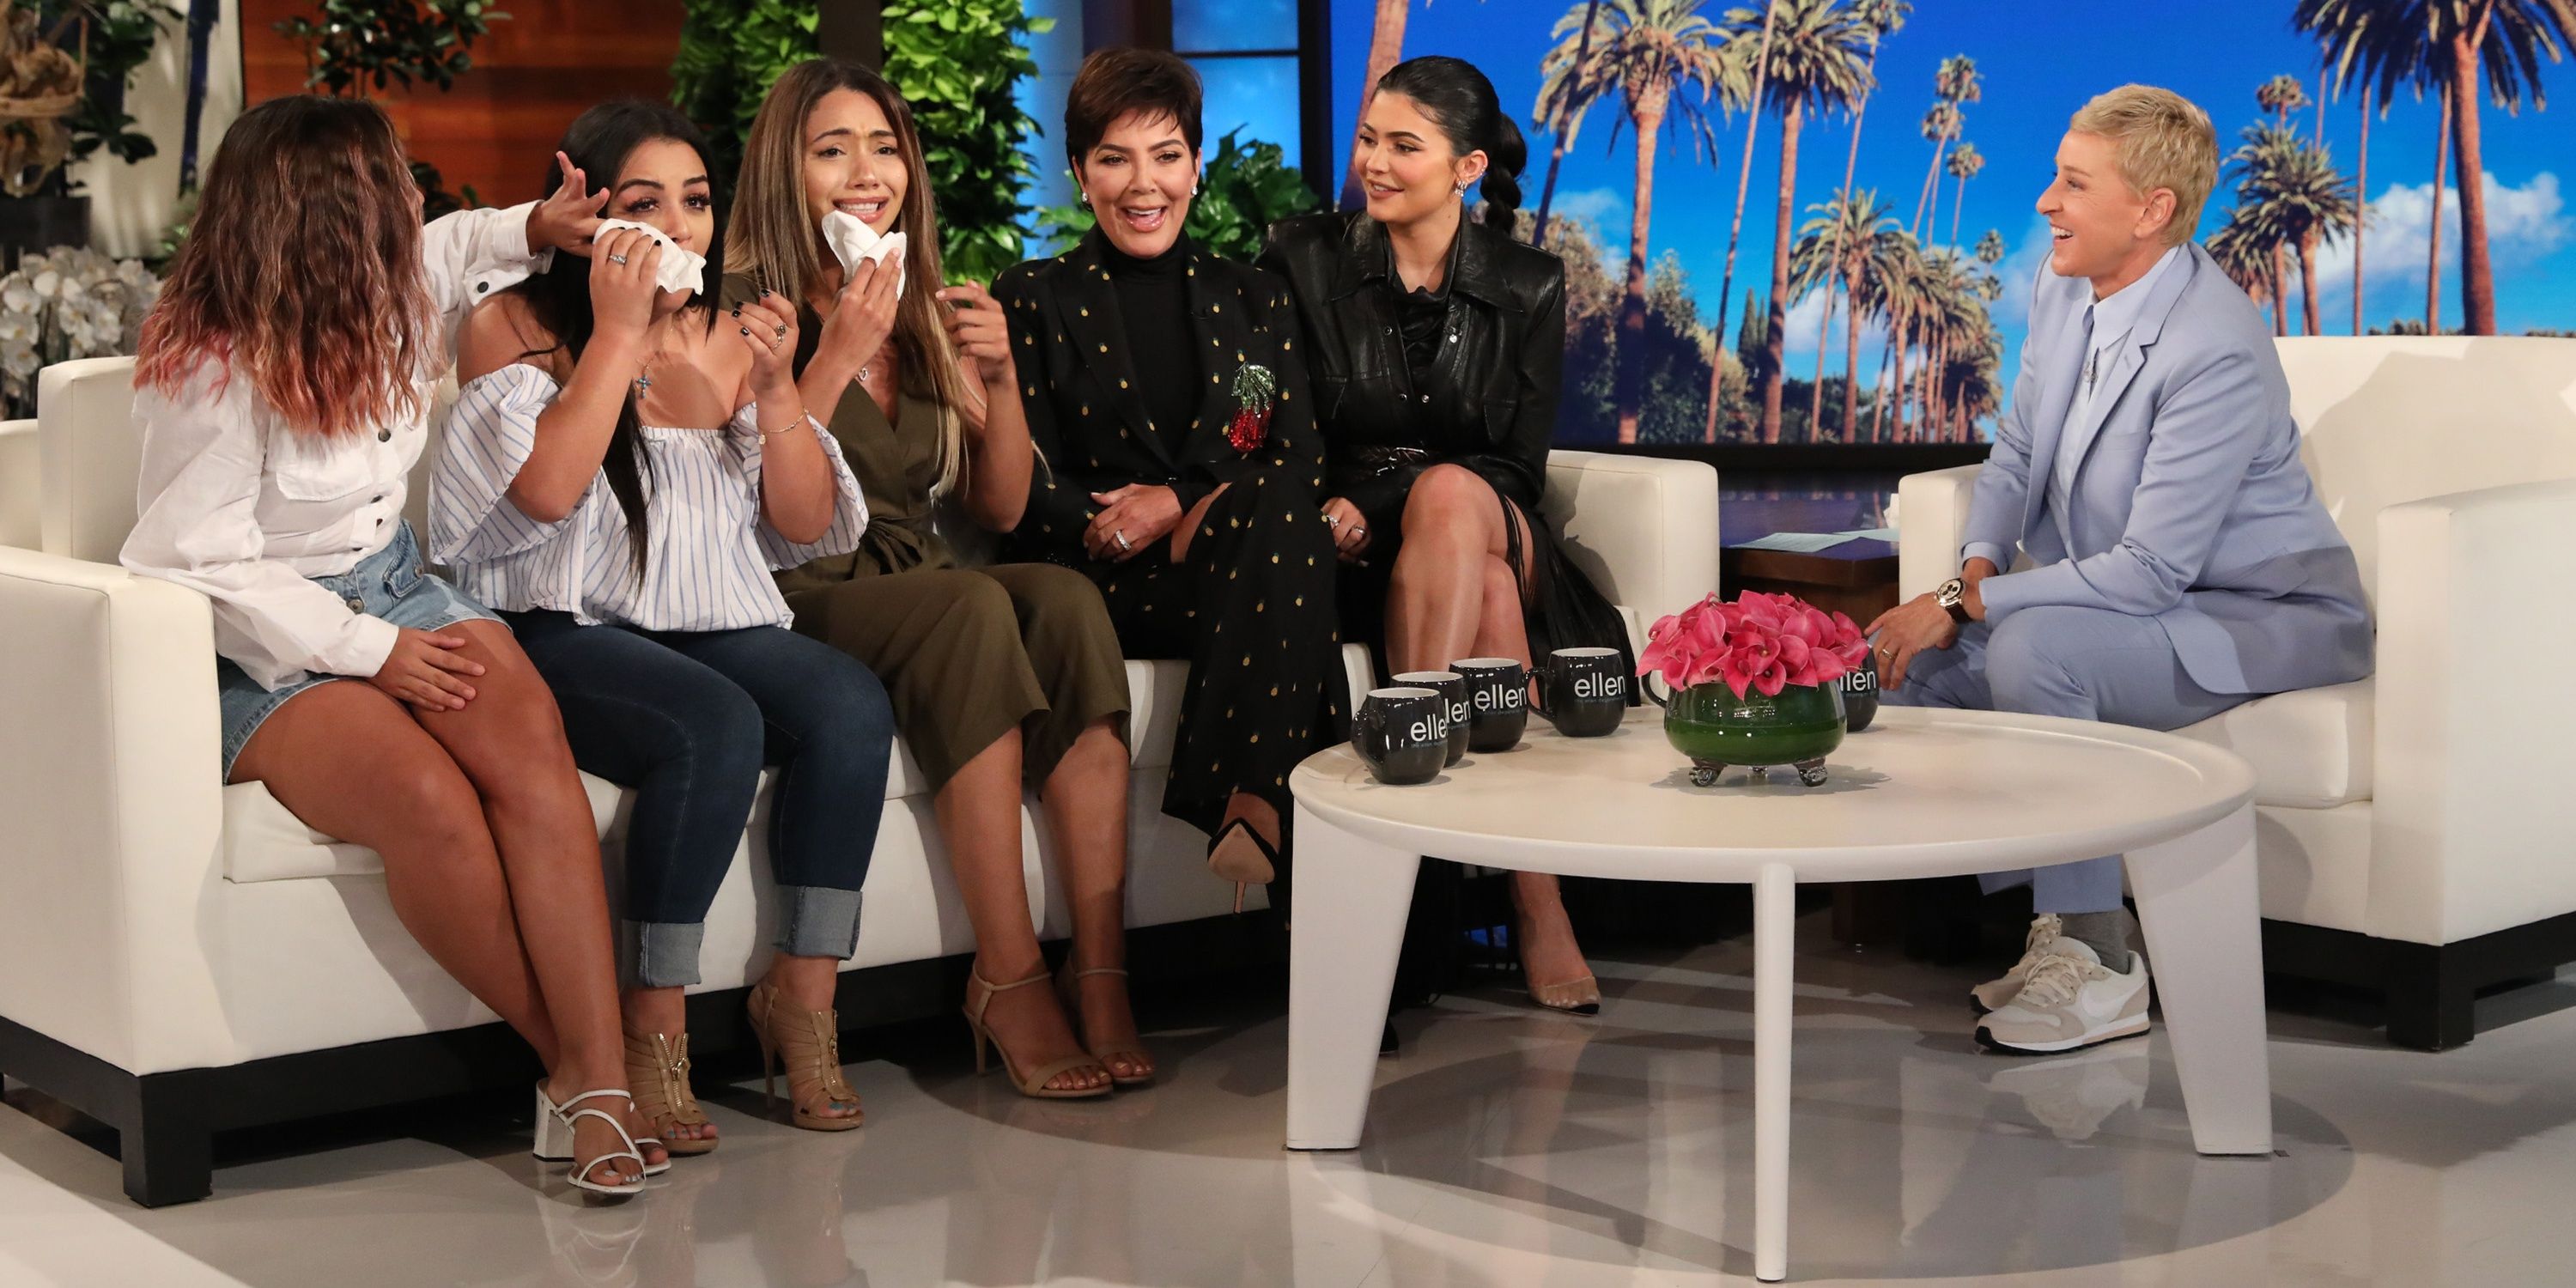 Kris and Kylie Jenner in black sitting at the end of the couch along with members of a charity on Ellen's show